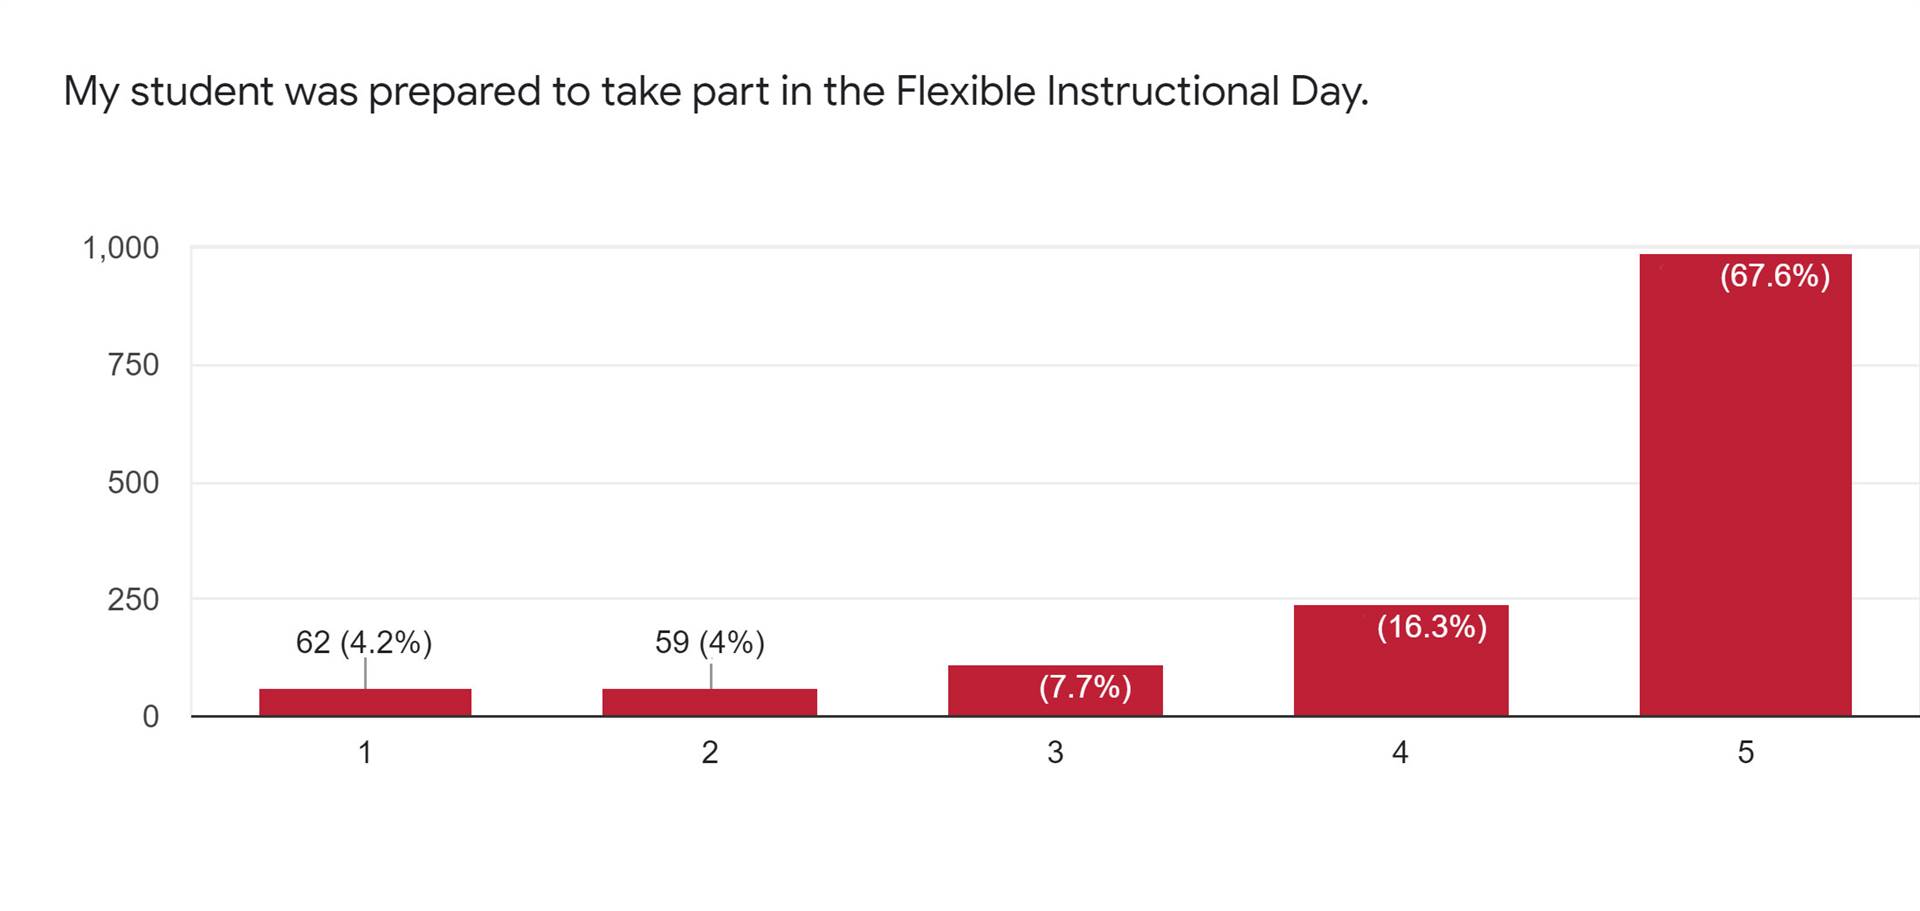 FID Survey Slide 7 - "My student was prepared to take part in the Flexible Instructional Day" bar ch